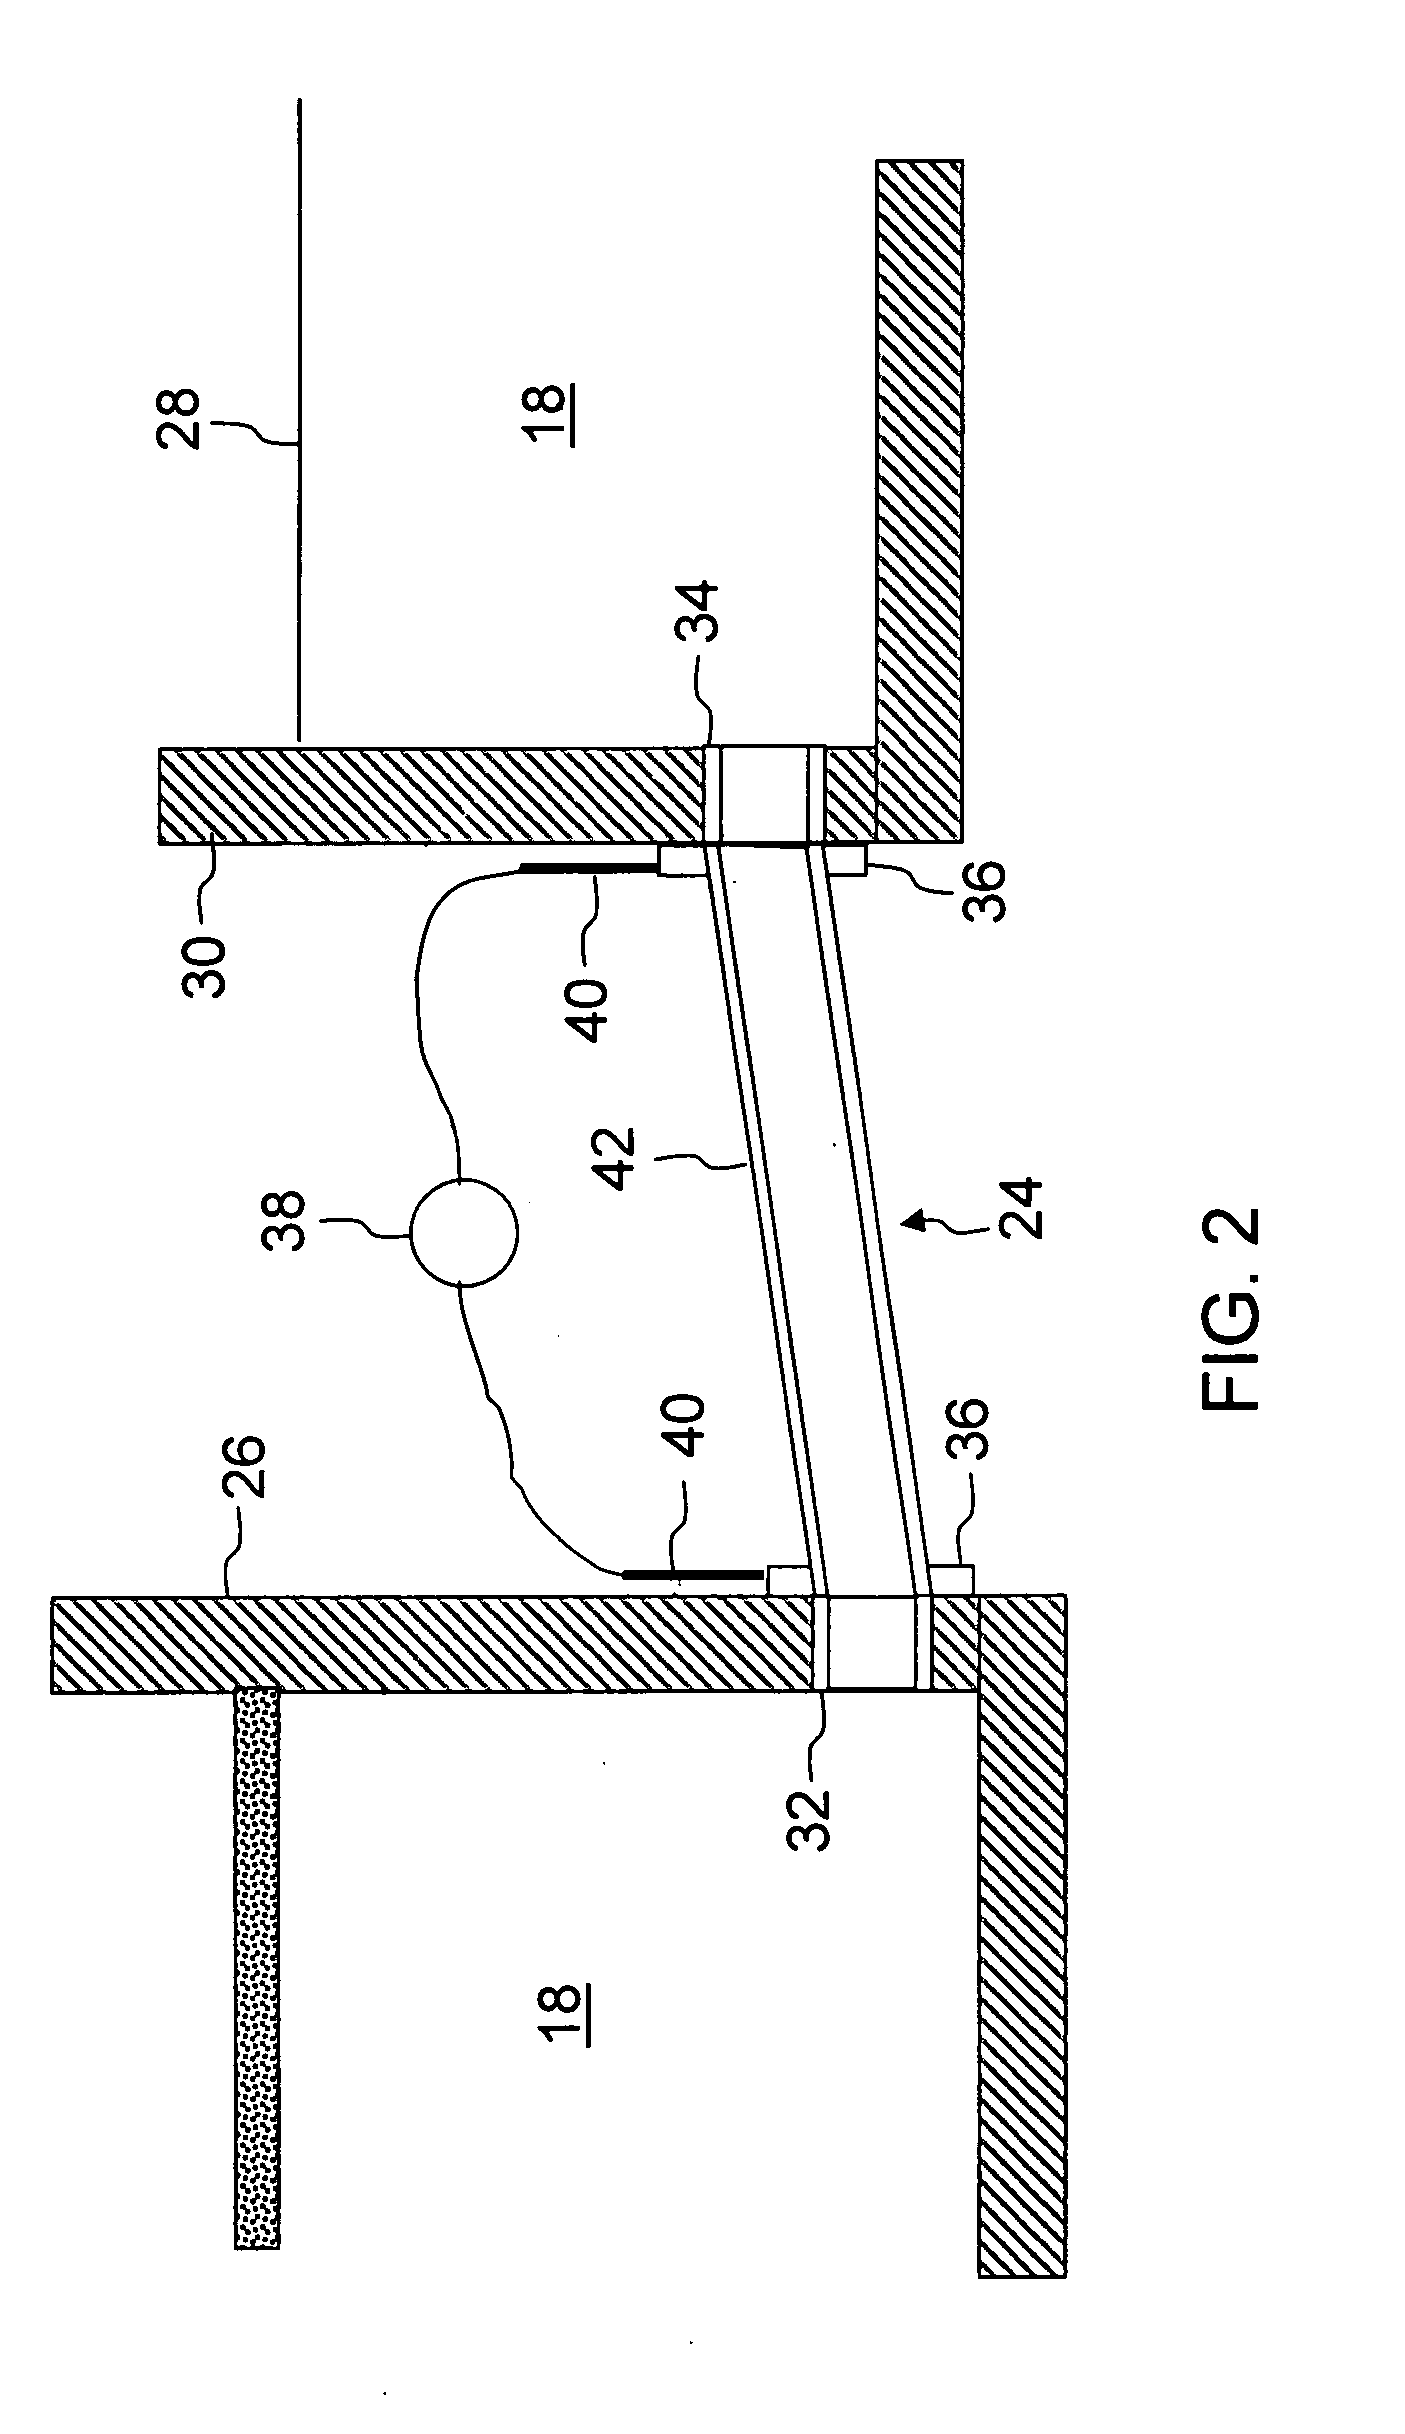 Method of forming a glass melt